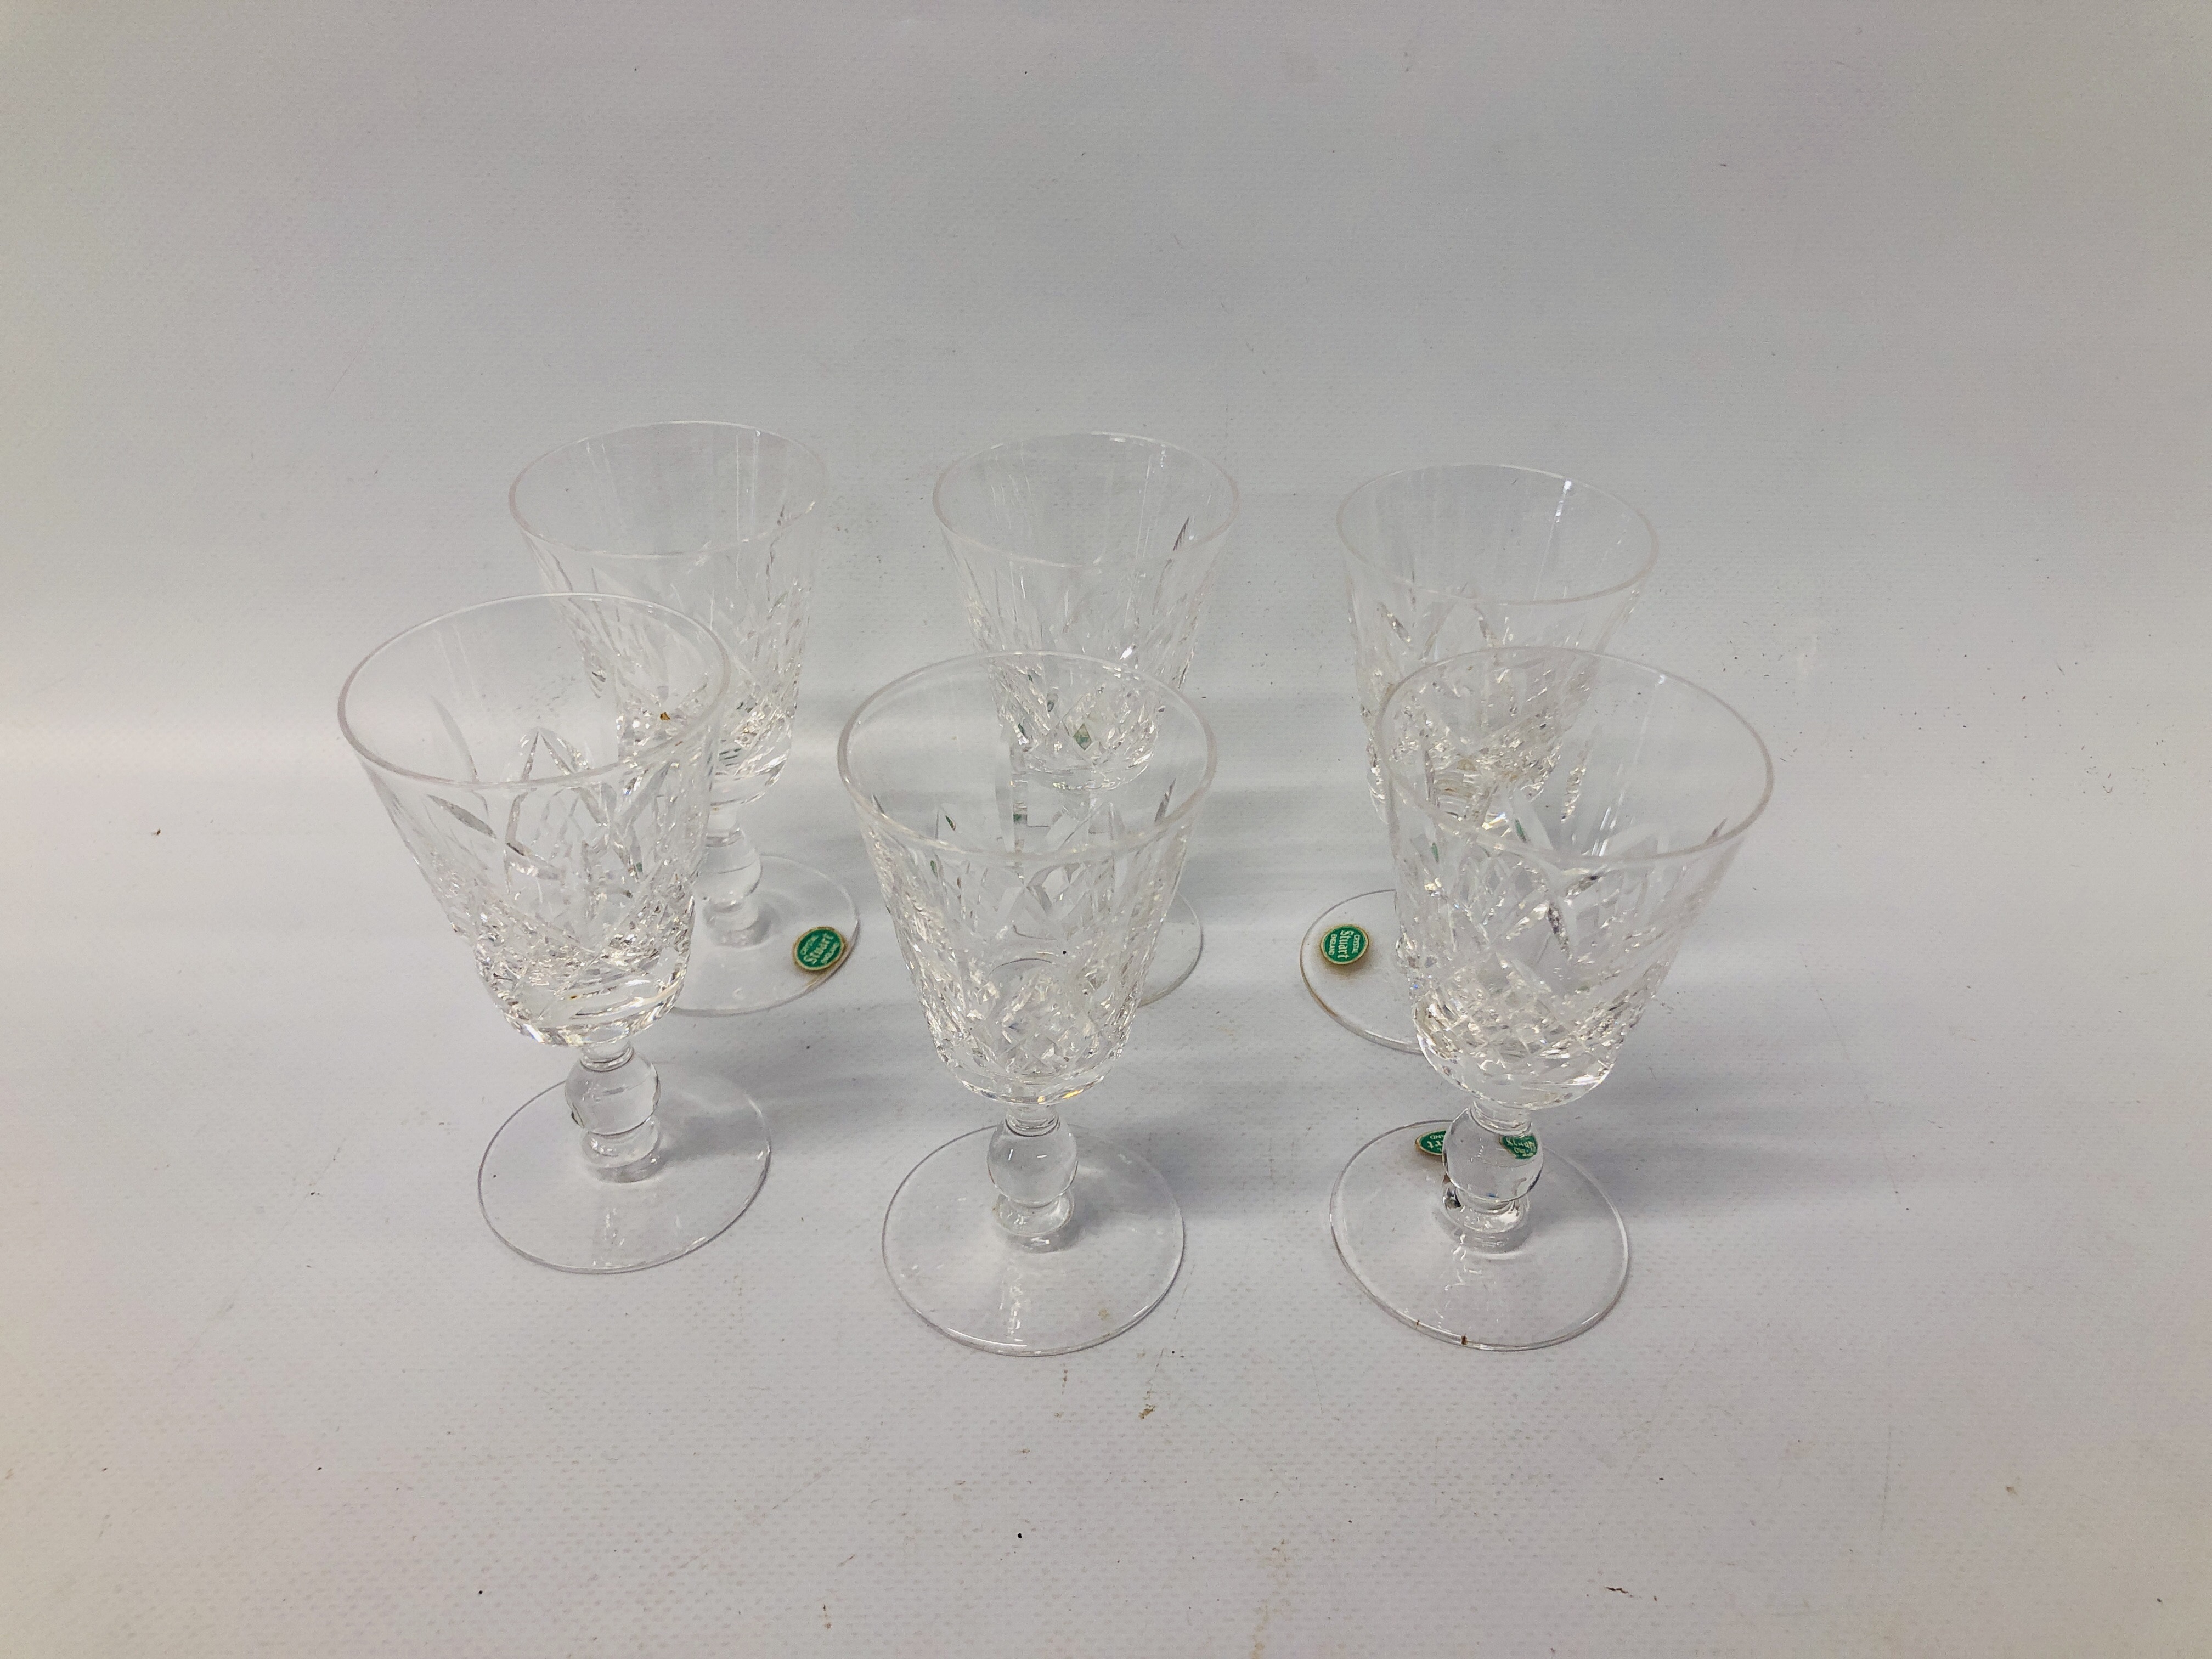 COLLECTION OF GOOD QUALITY CUT GLASS CRYSTAL DRINKING VESSELS ALONG WITH A SET OF 4 HAND PAINTED - Image 10 of 11